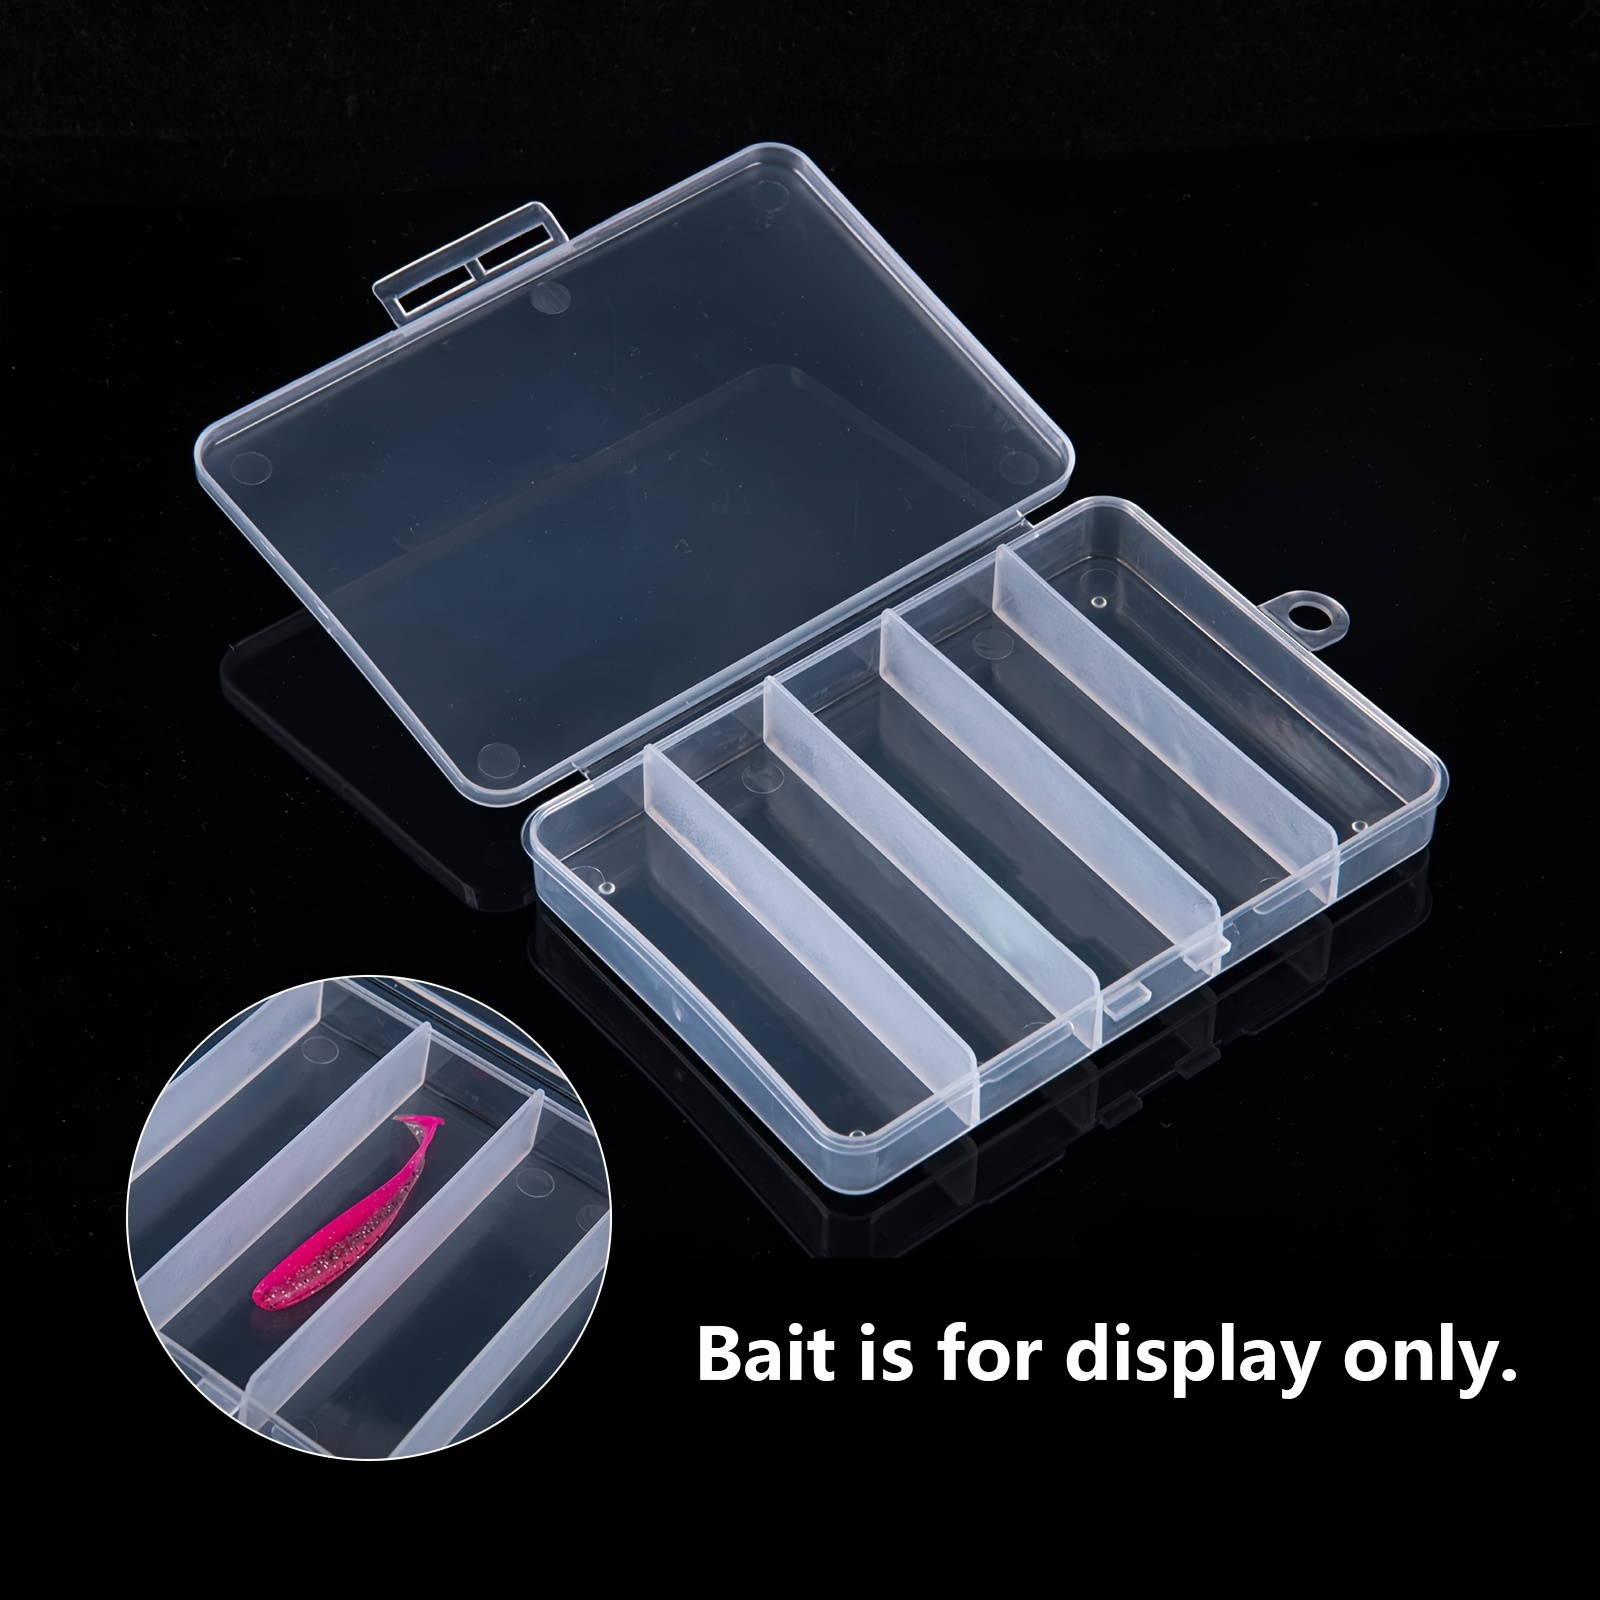 Organize Your Fishing Tackle Box With * 2-Layer Large Tackle Box - Clear  Lid, Adjustable Dividers, Plastic Storage (15 3/8 X 10 5/8 X 2 1/4)